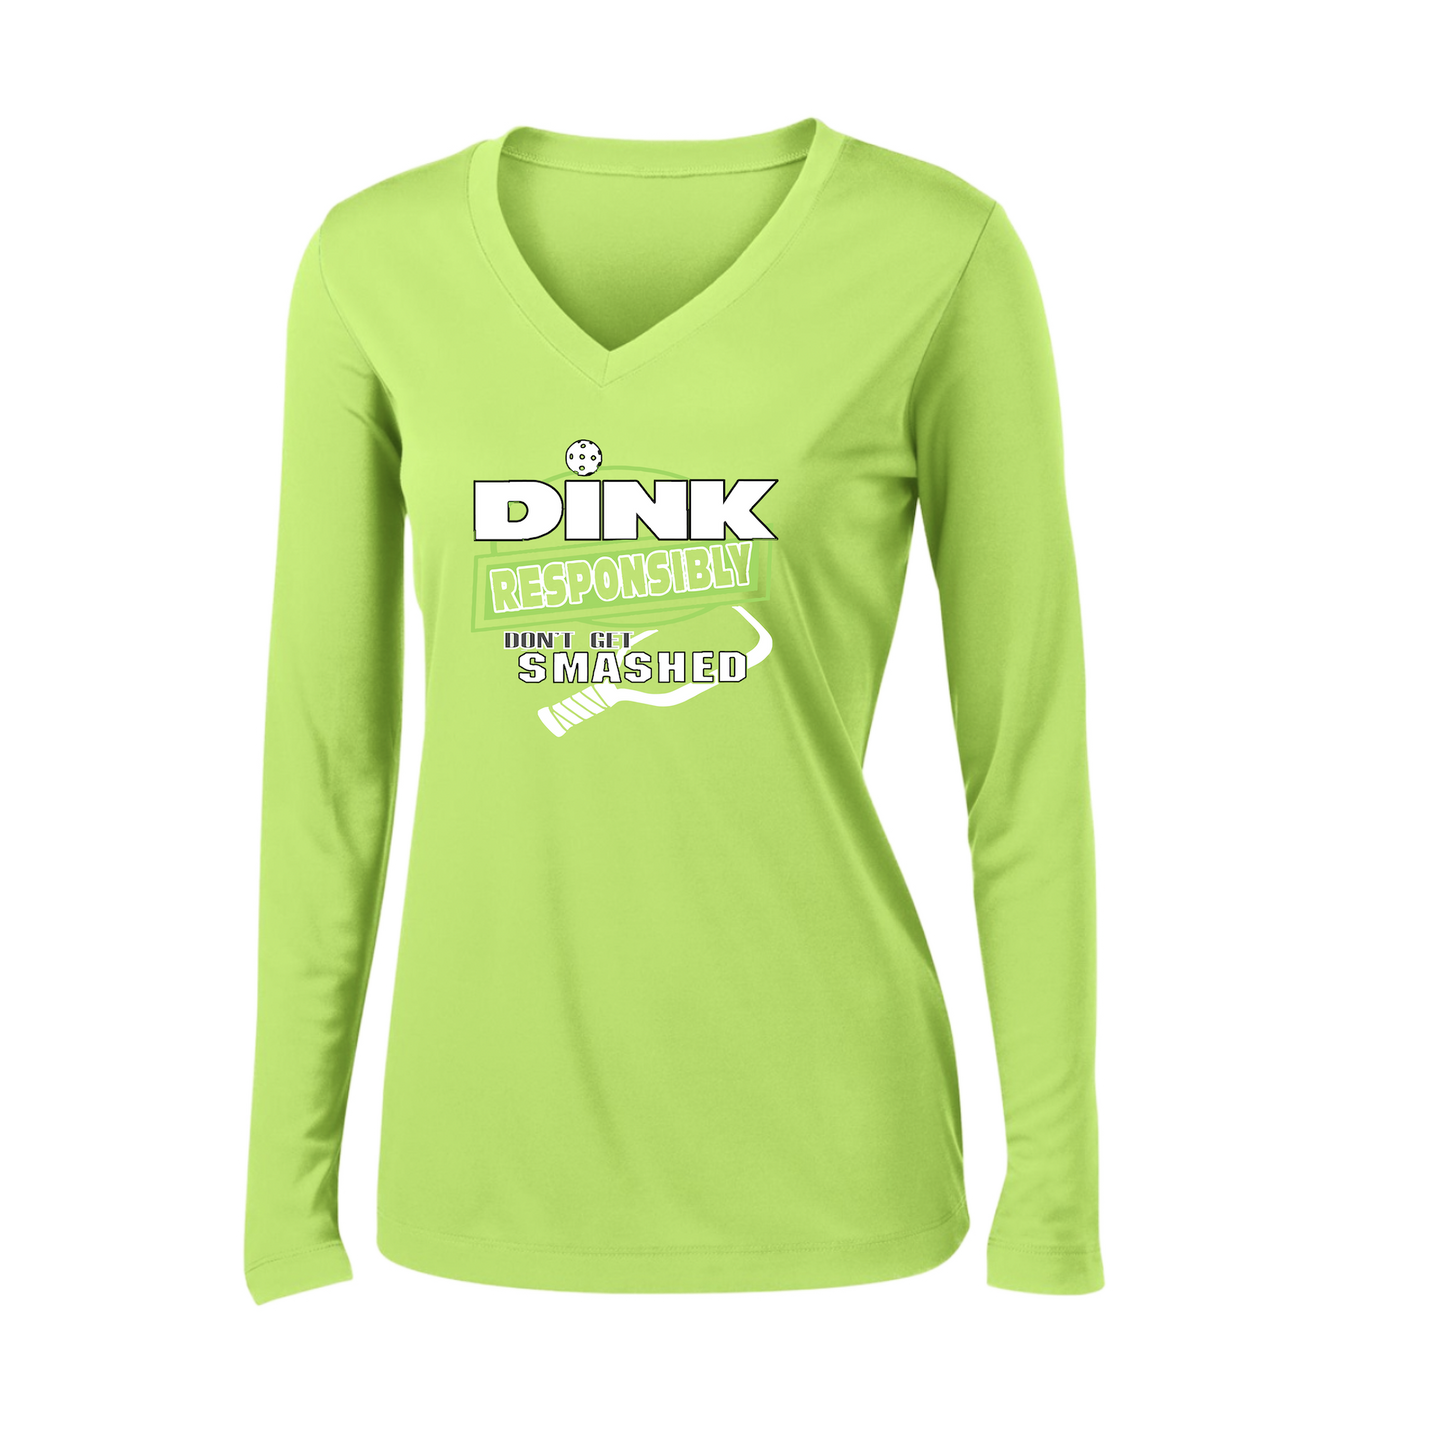 Pickleball Design: Dink Responsibly - Don't Get Smashed  Women's Style: Long Sleeve V-Neck  Turn up the volume in this Women's shirt with its perfect mix of softness and attitude. Material is ultra-comfortable with moisture wicking properties and tri-blend softness. PosiCharge technology locks in color. Highly breathable and lightweight.